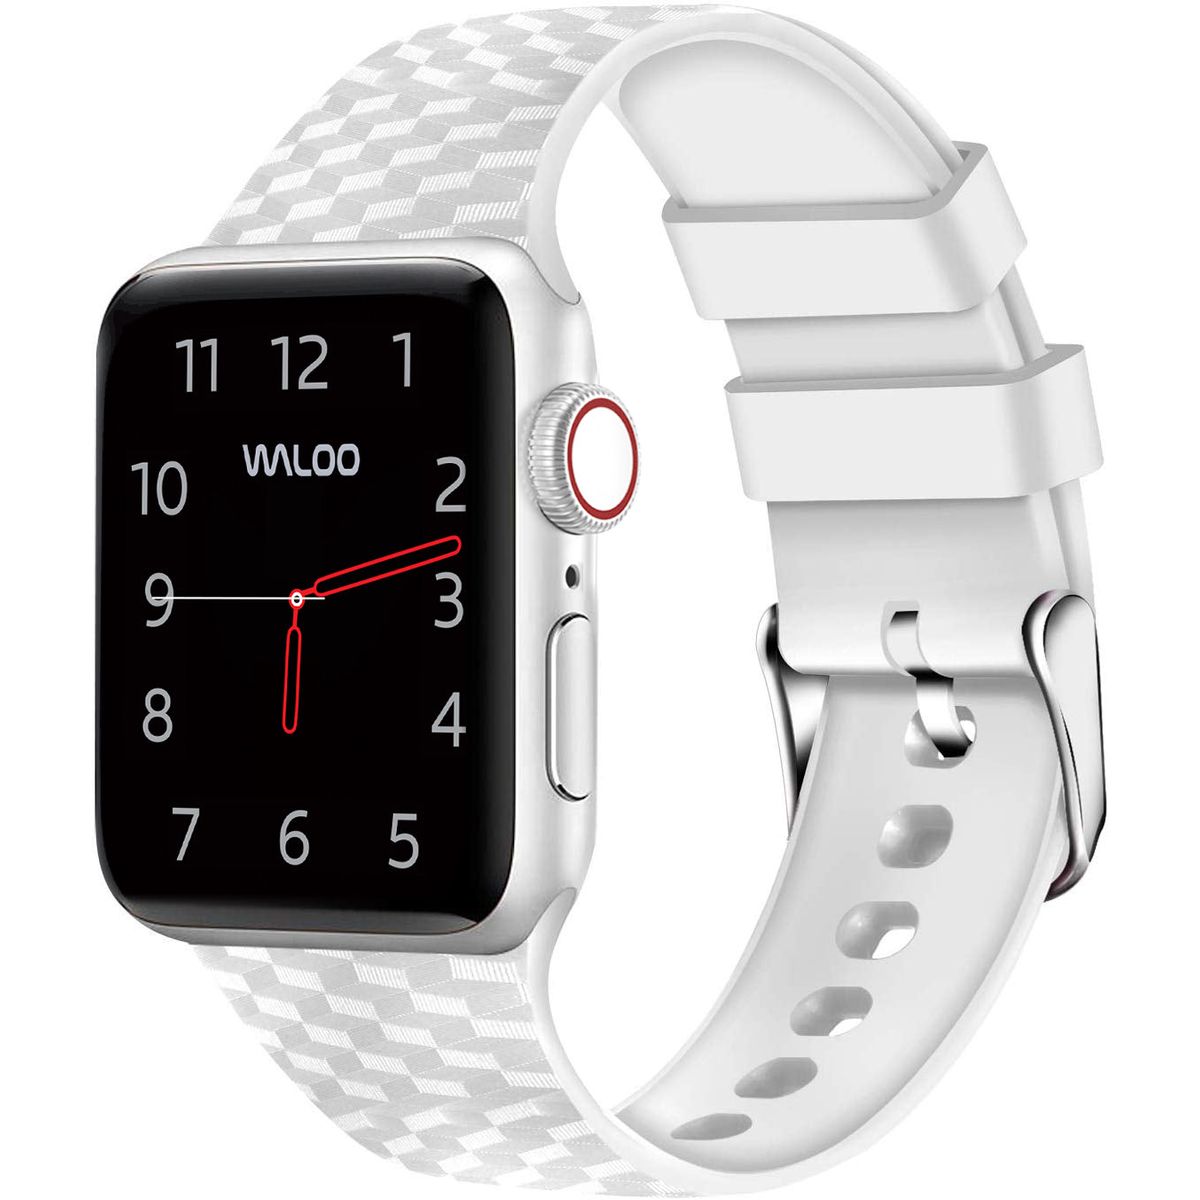 Photos - Watch Strap Waloo Products Carbon Fiber Silicone Band for Apple Watch Series 1-9 - 42/